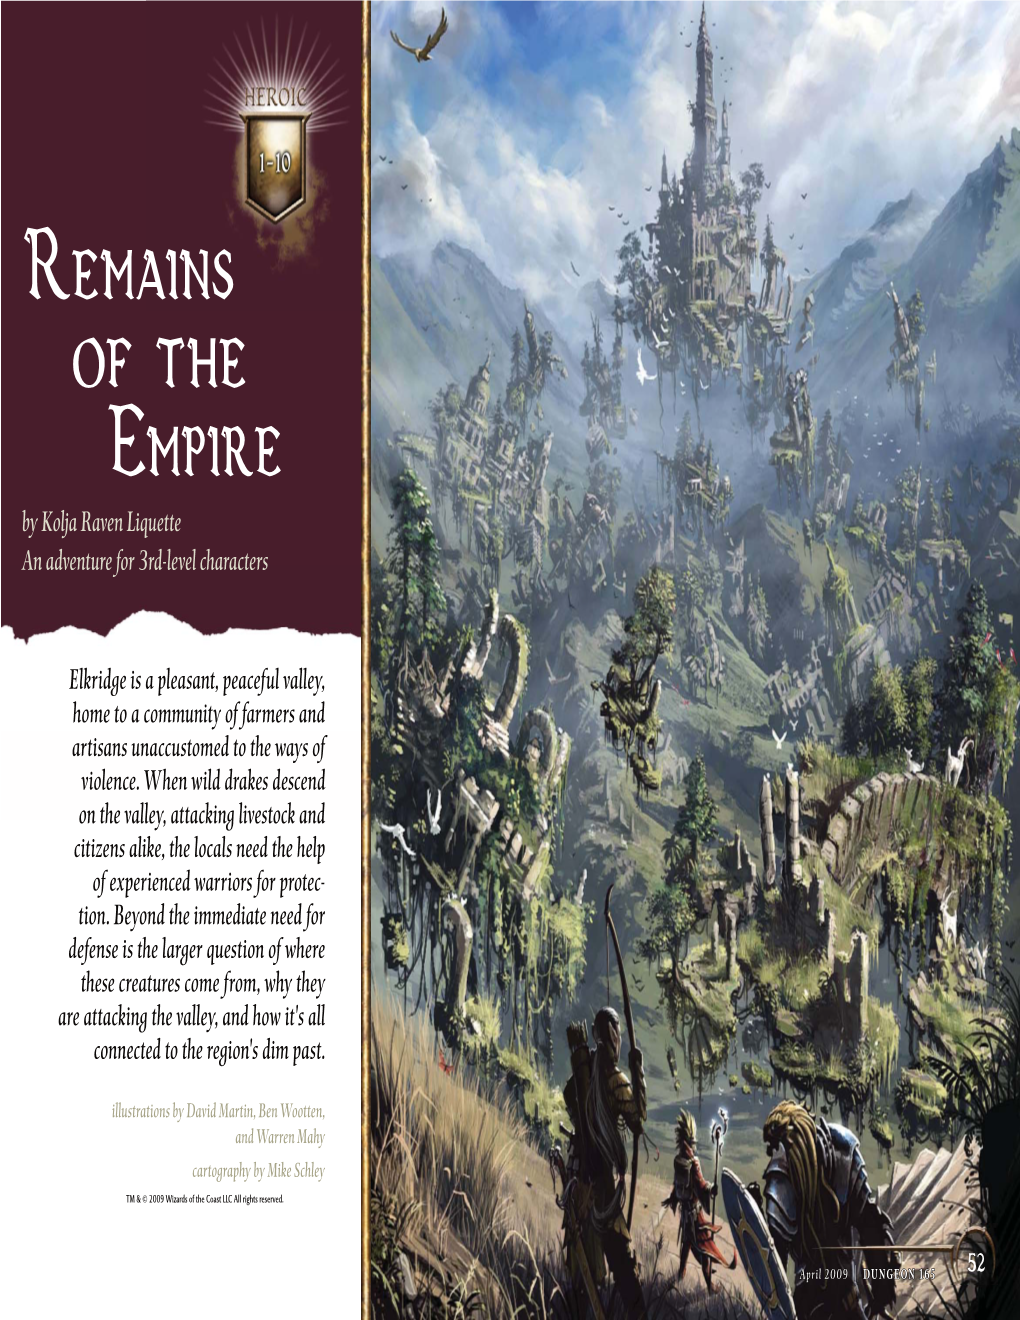 Remains of the Empire by Kolja Raven Liquette an Adventure for 3Rd-Level Characters